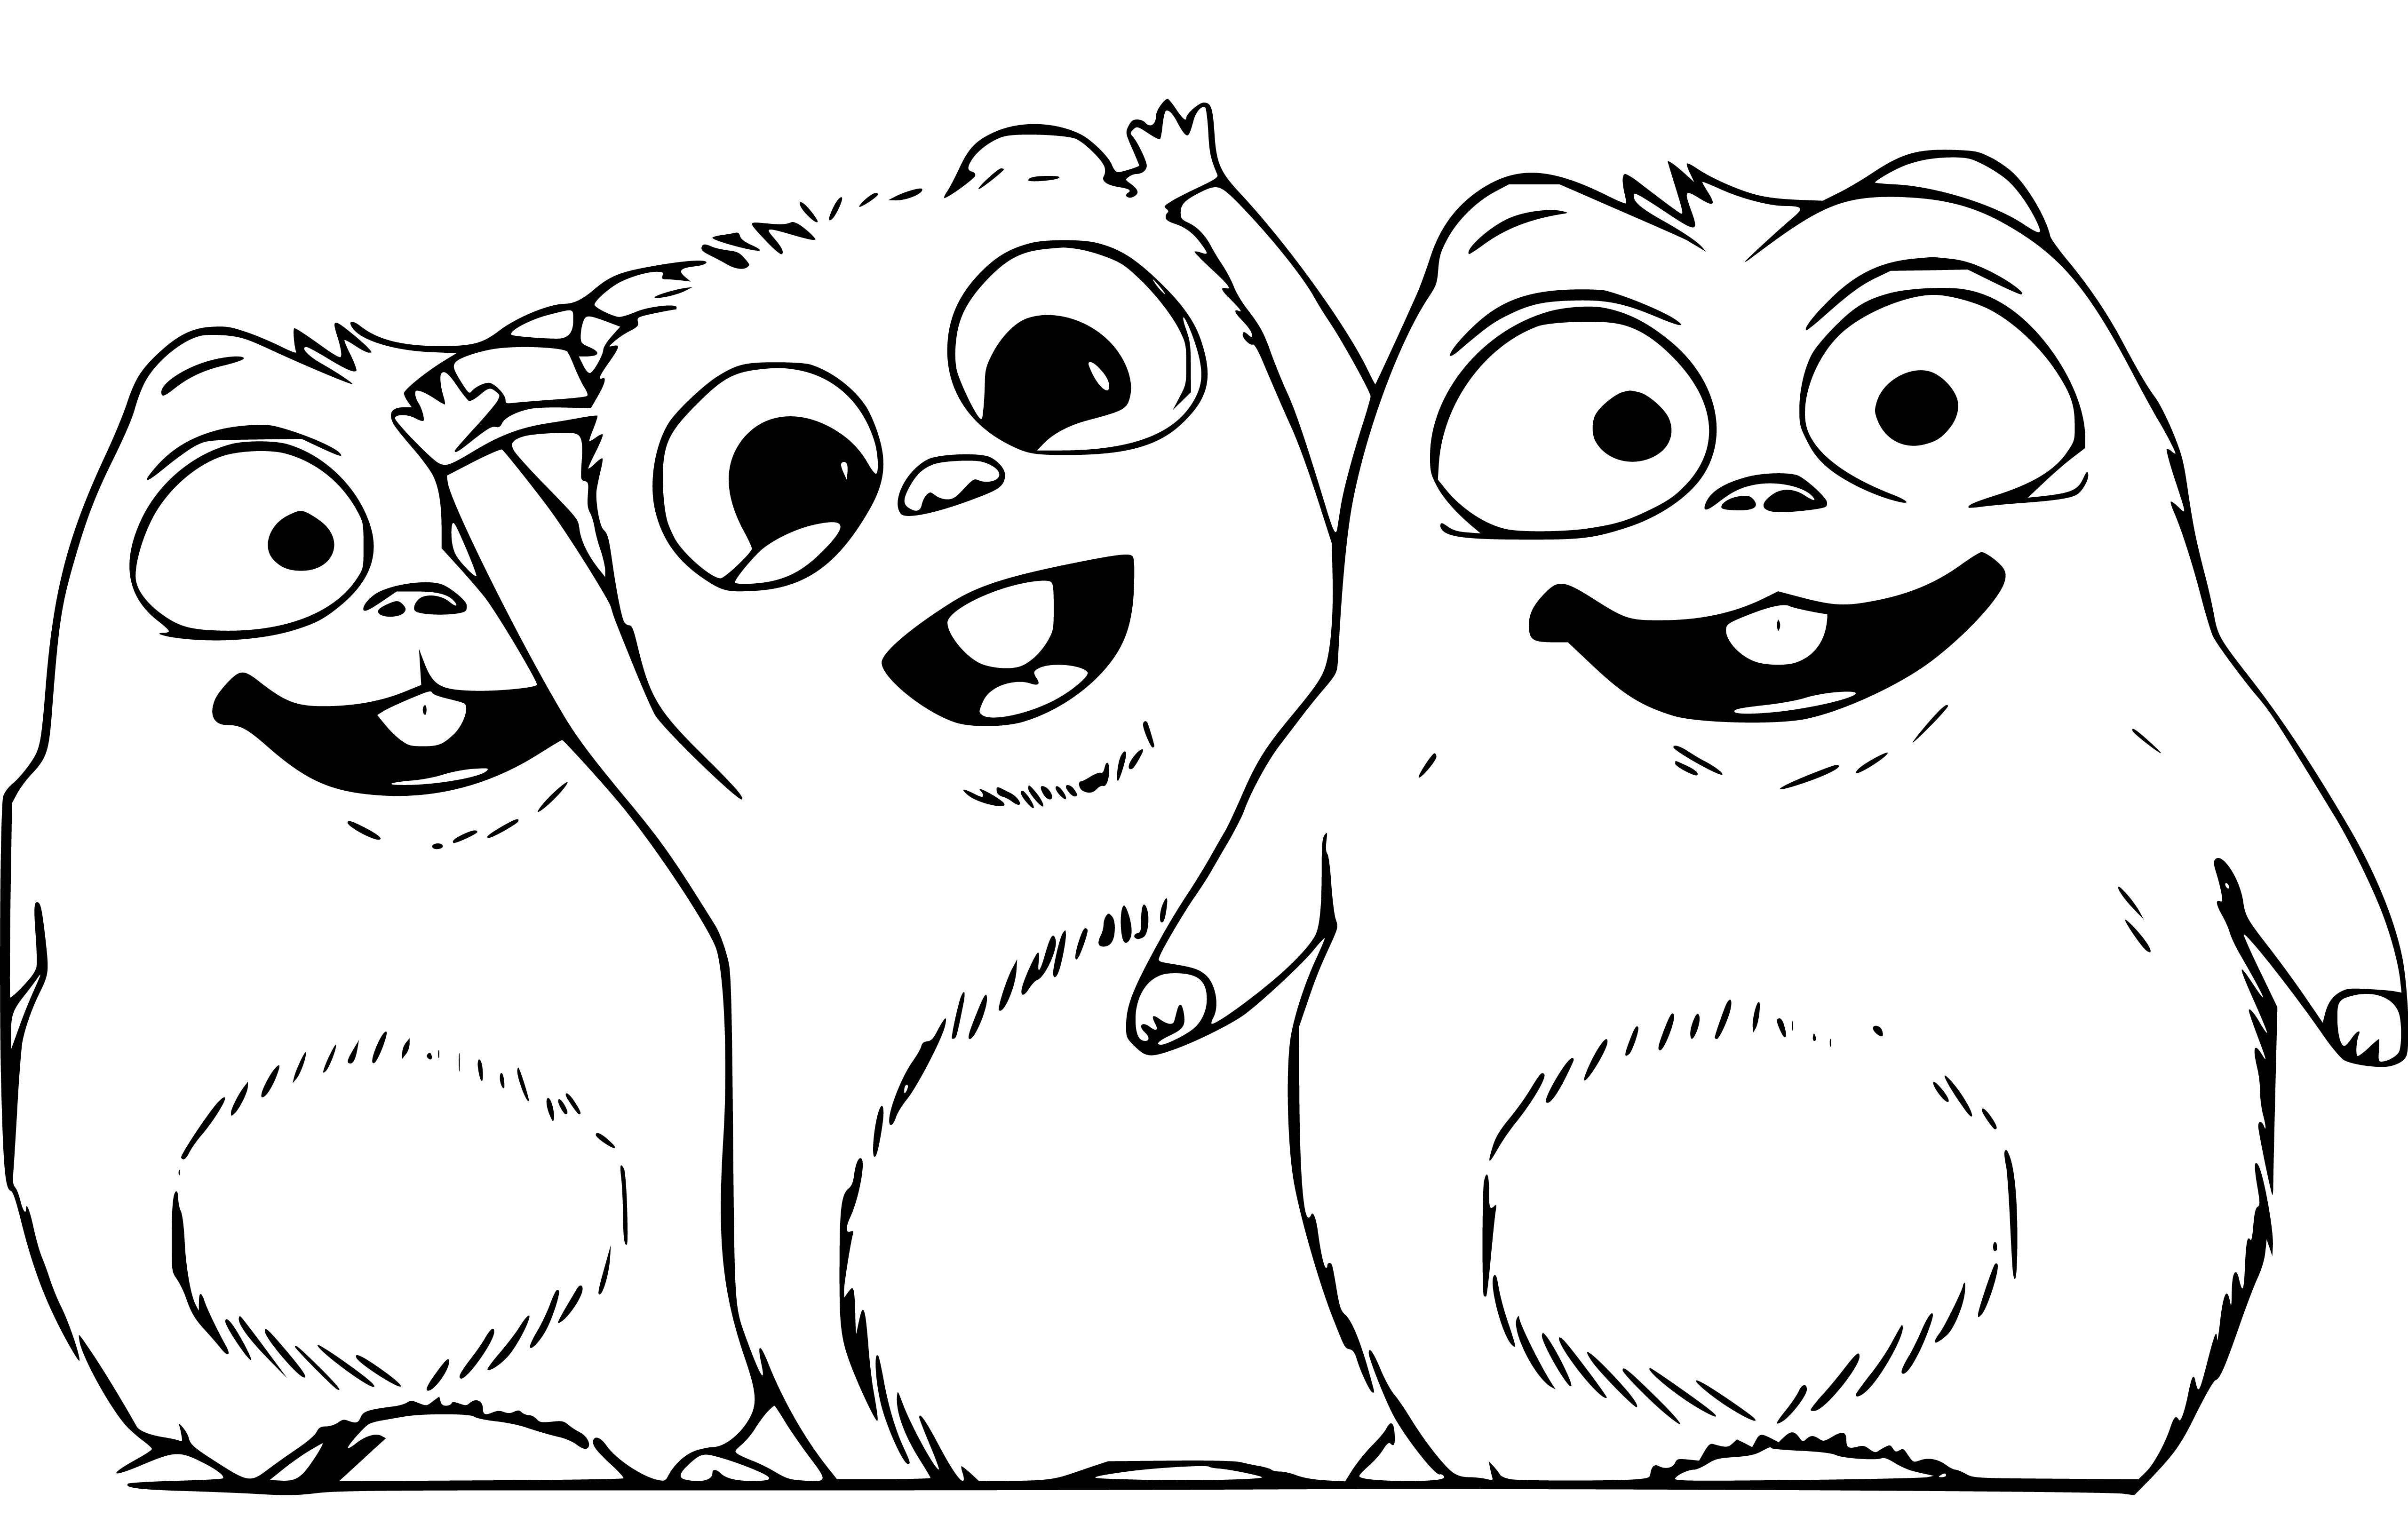 Grizzy and the Lemmings Coloring Sheet for Children - SheetalColor.com